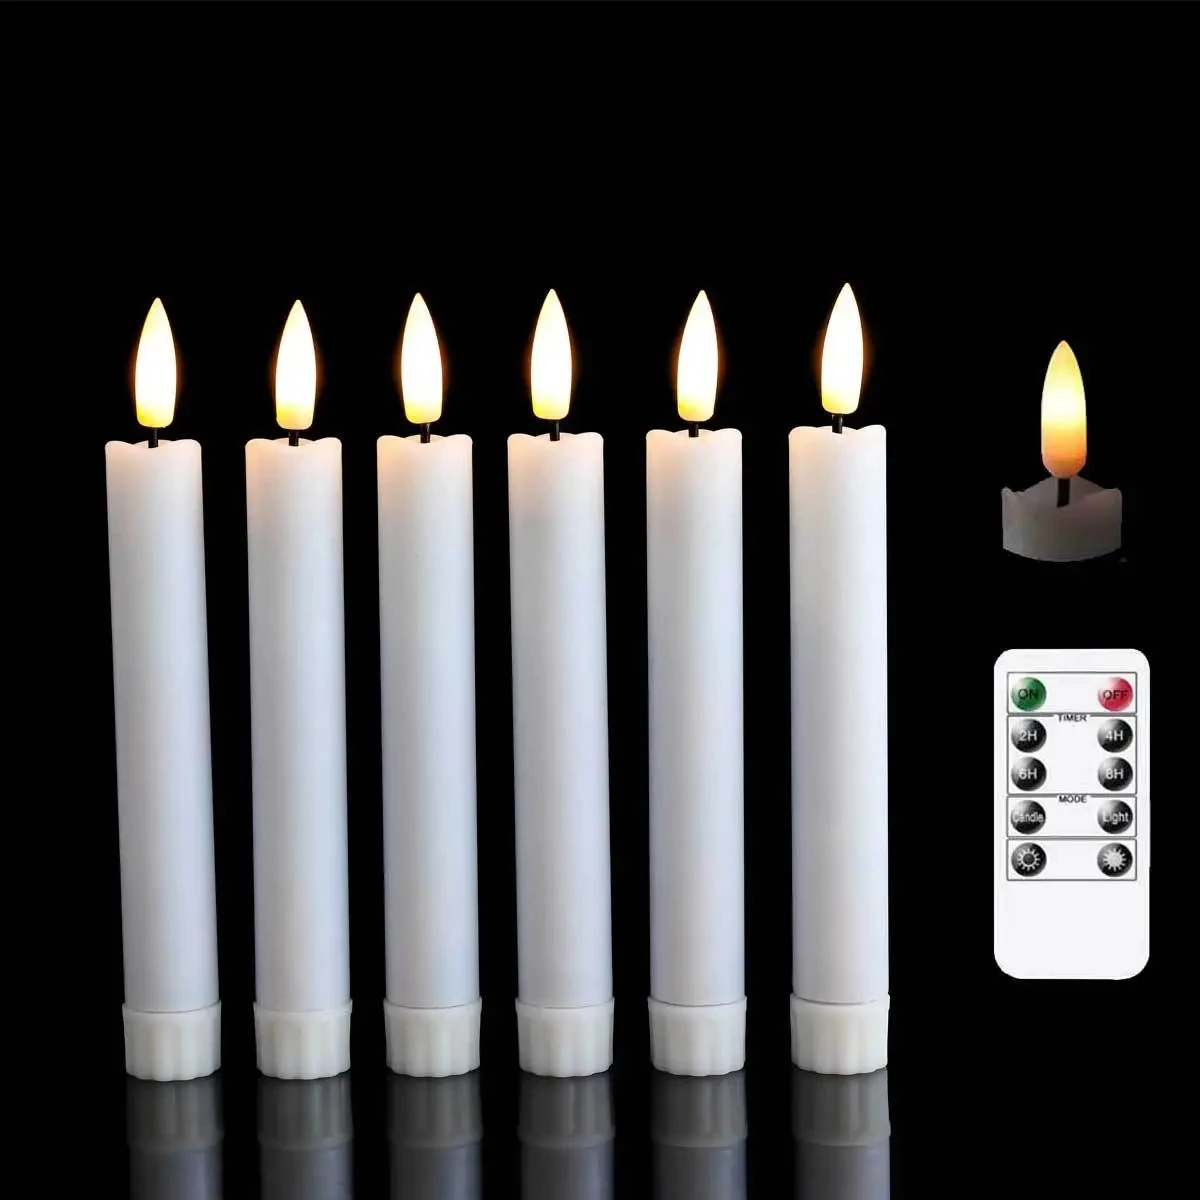 

80pcs twinkling Christmas LED candles with remote control, 10 "long battery operated warm white decorative candles